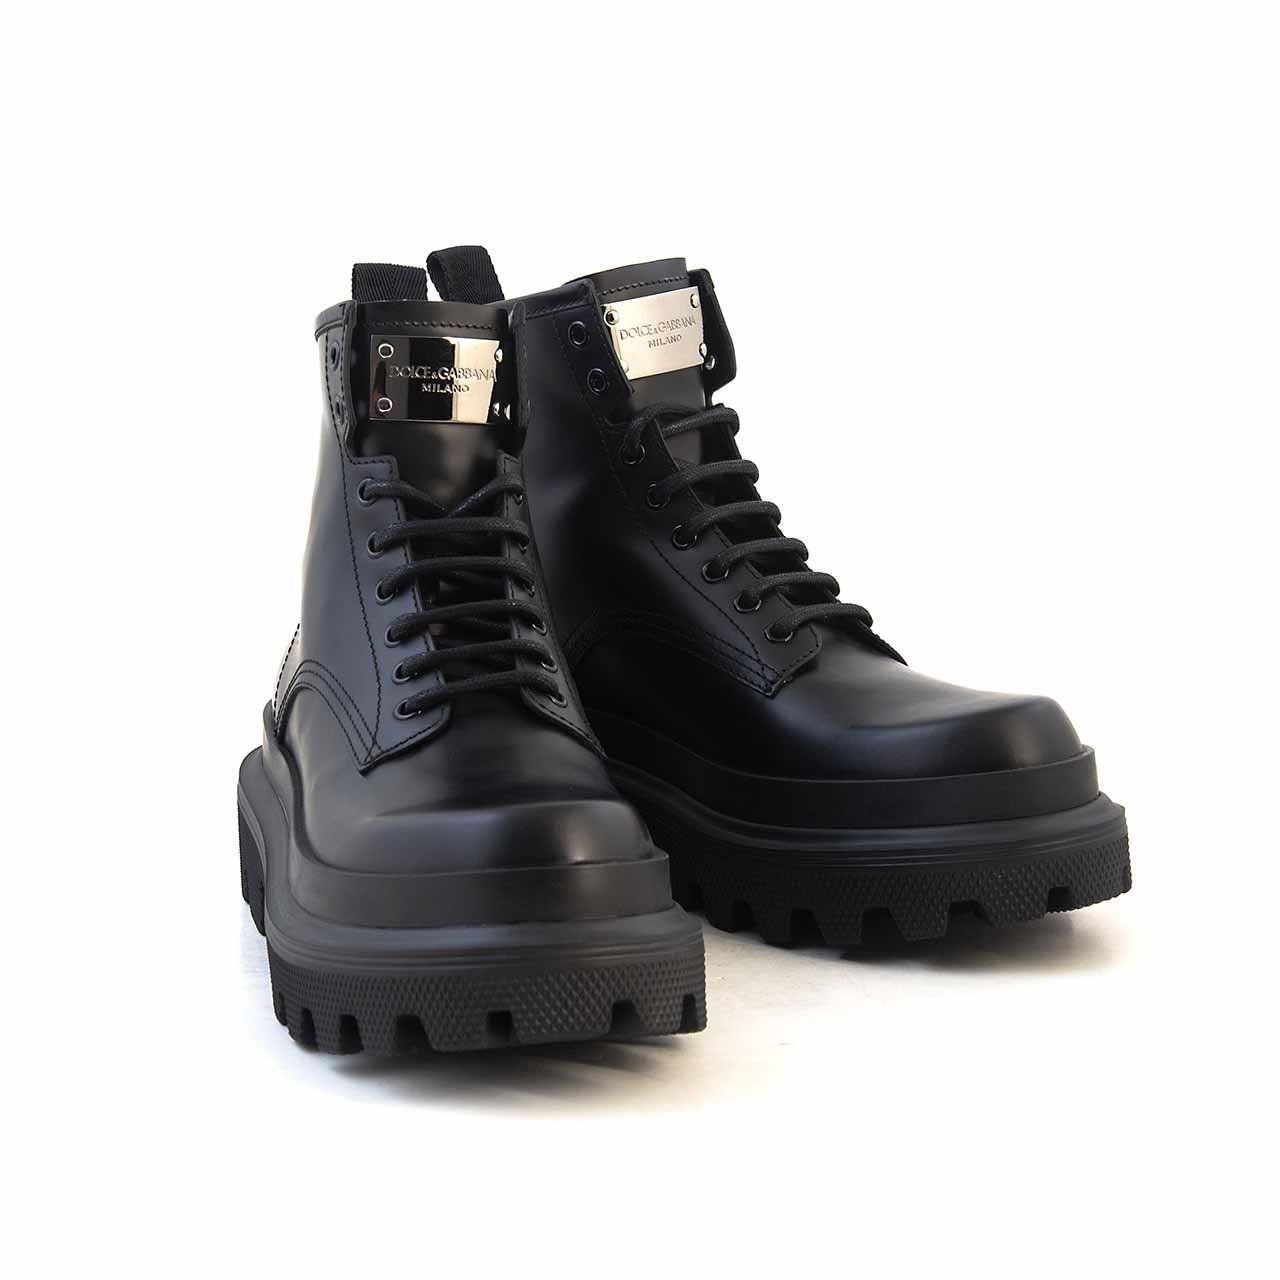 Dolce Gabbana Leather Men's Boots